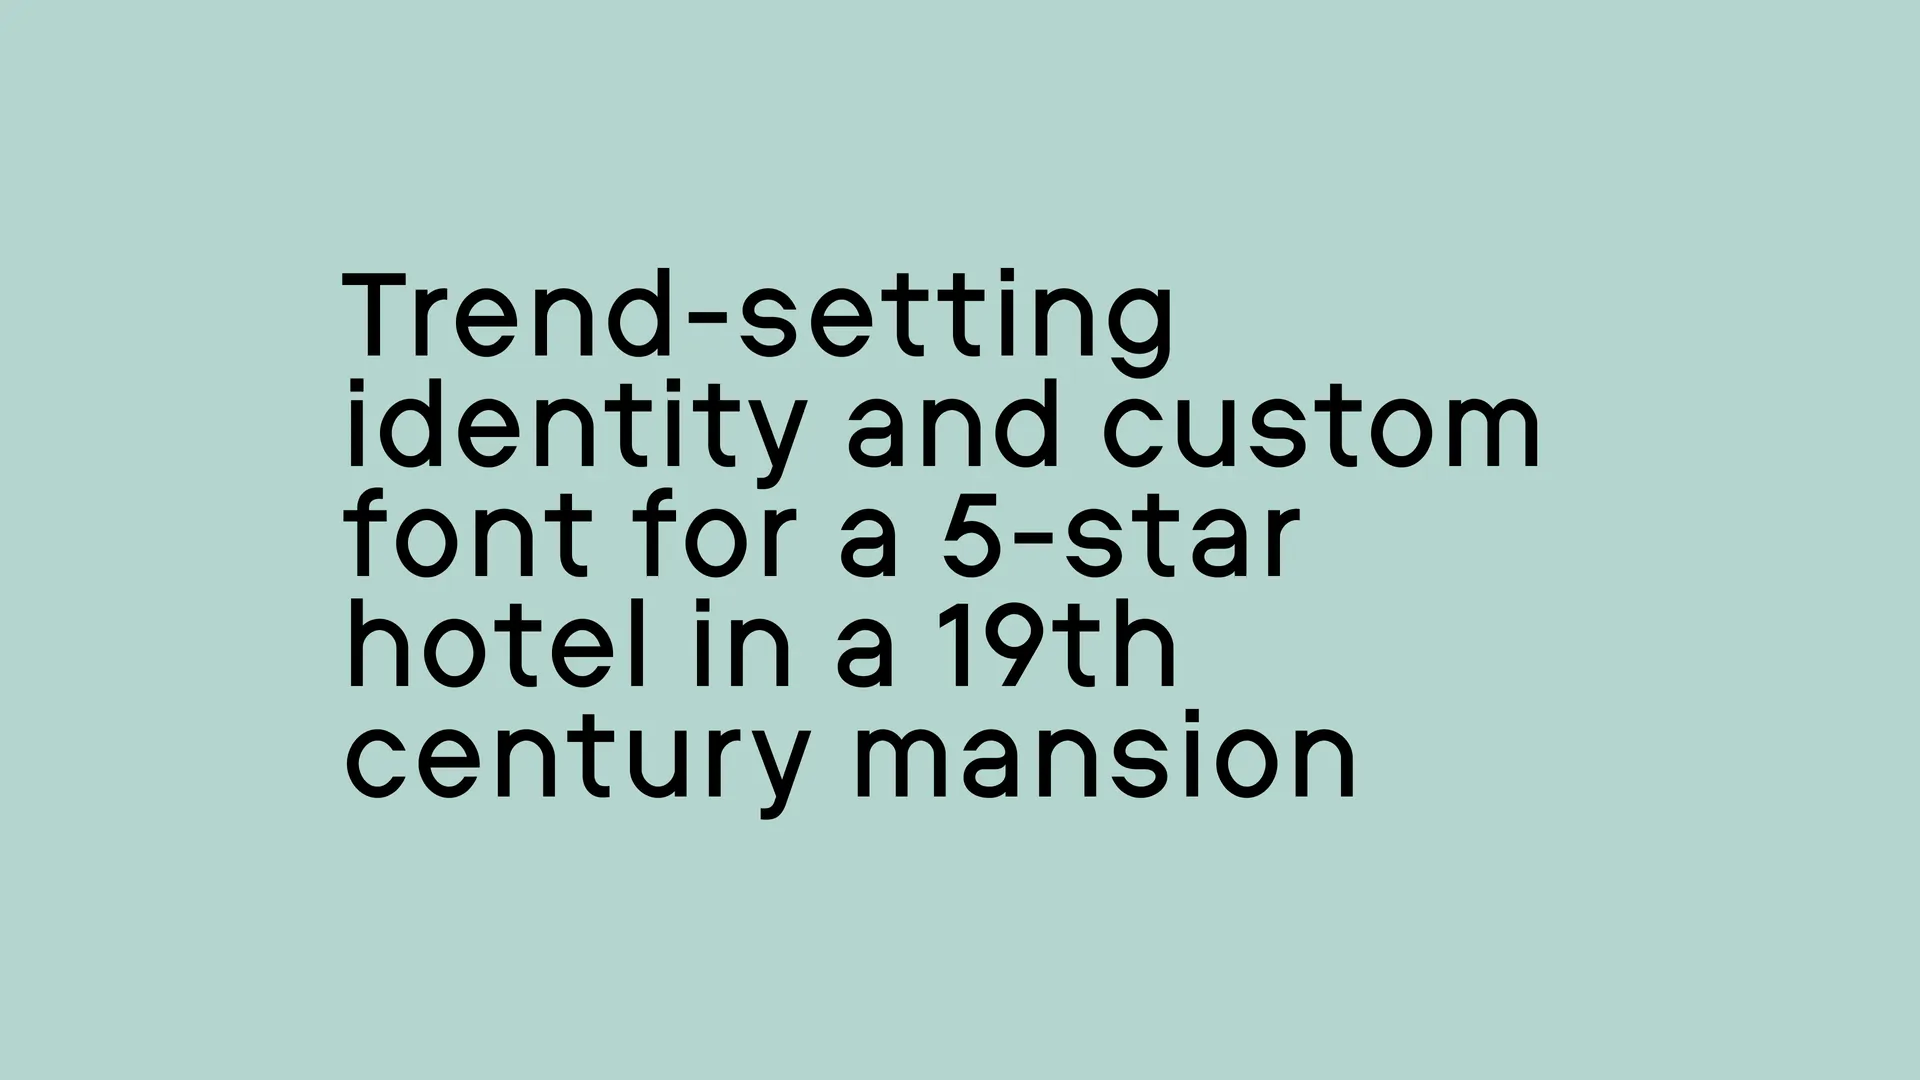 Trend-setting identity and custom font for a 5-star hotel in a 19th century mansion